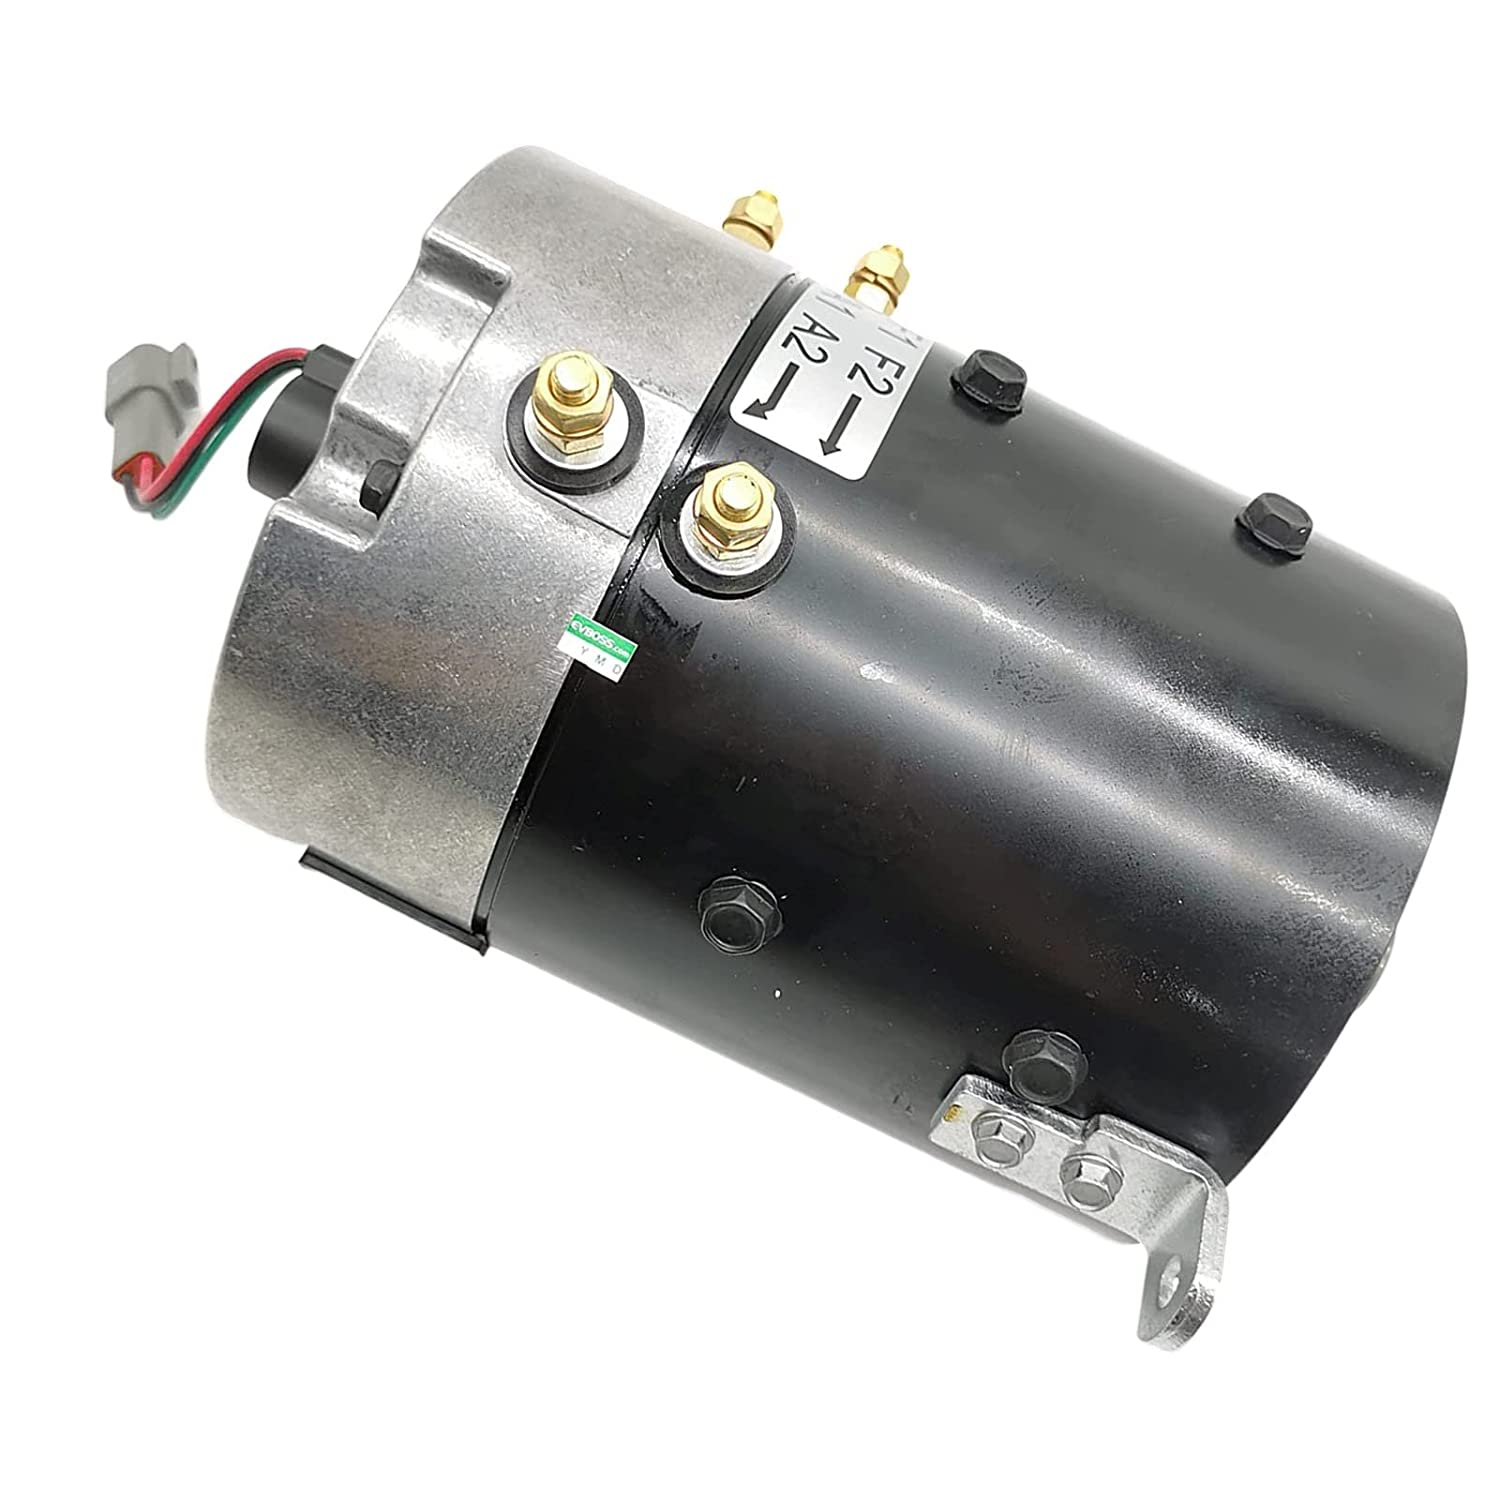 Seapple 48V DC XP-2067-S Electric Drive Motor Compatible with SepEx Motor ZQS48-3.7-T-GN 103572501 1035725-01 102240102 3.7 kW Electric Vehicle Club Car Golf Cart - image 4 of 6